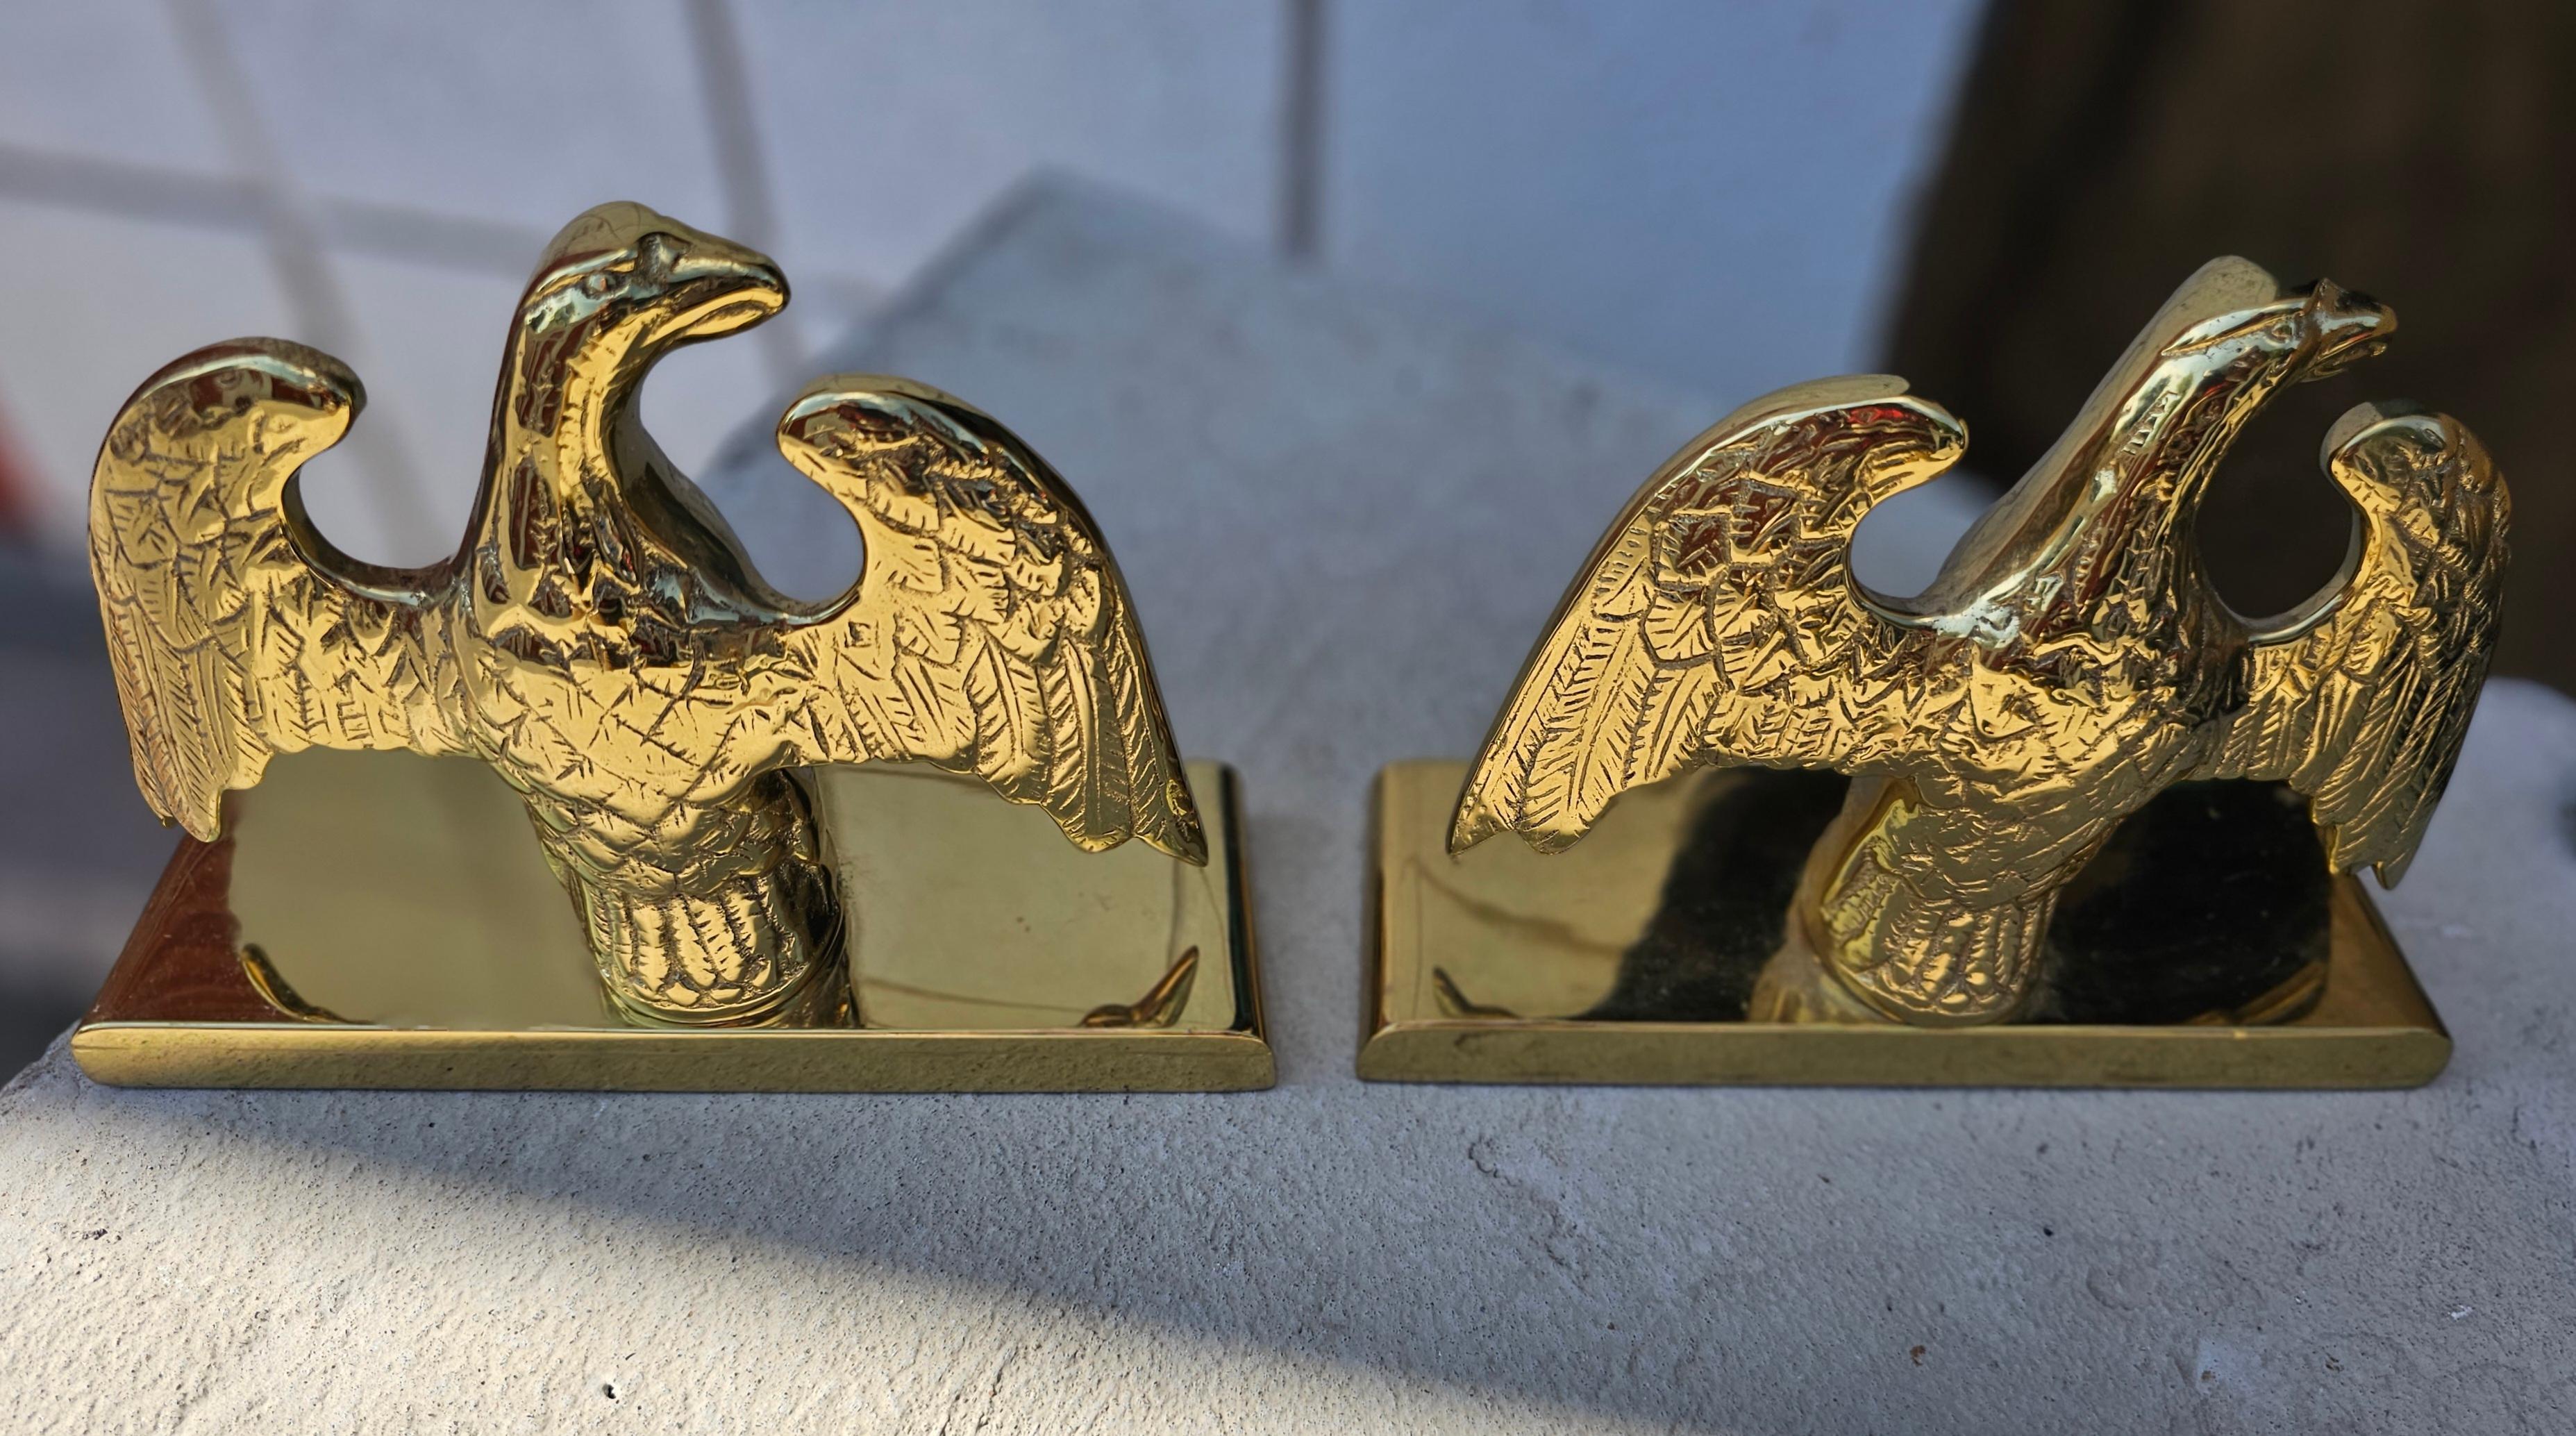 Pair of Mid-Century cast polished brass eagle Bookends by Virginia Metalcrafters.
Measure 7.75